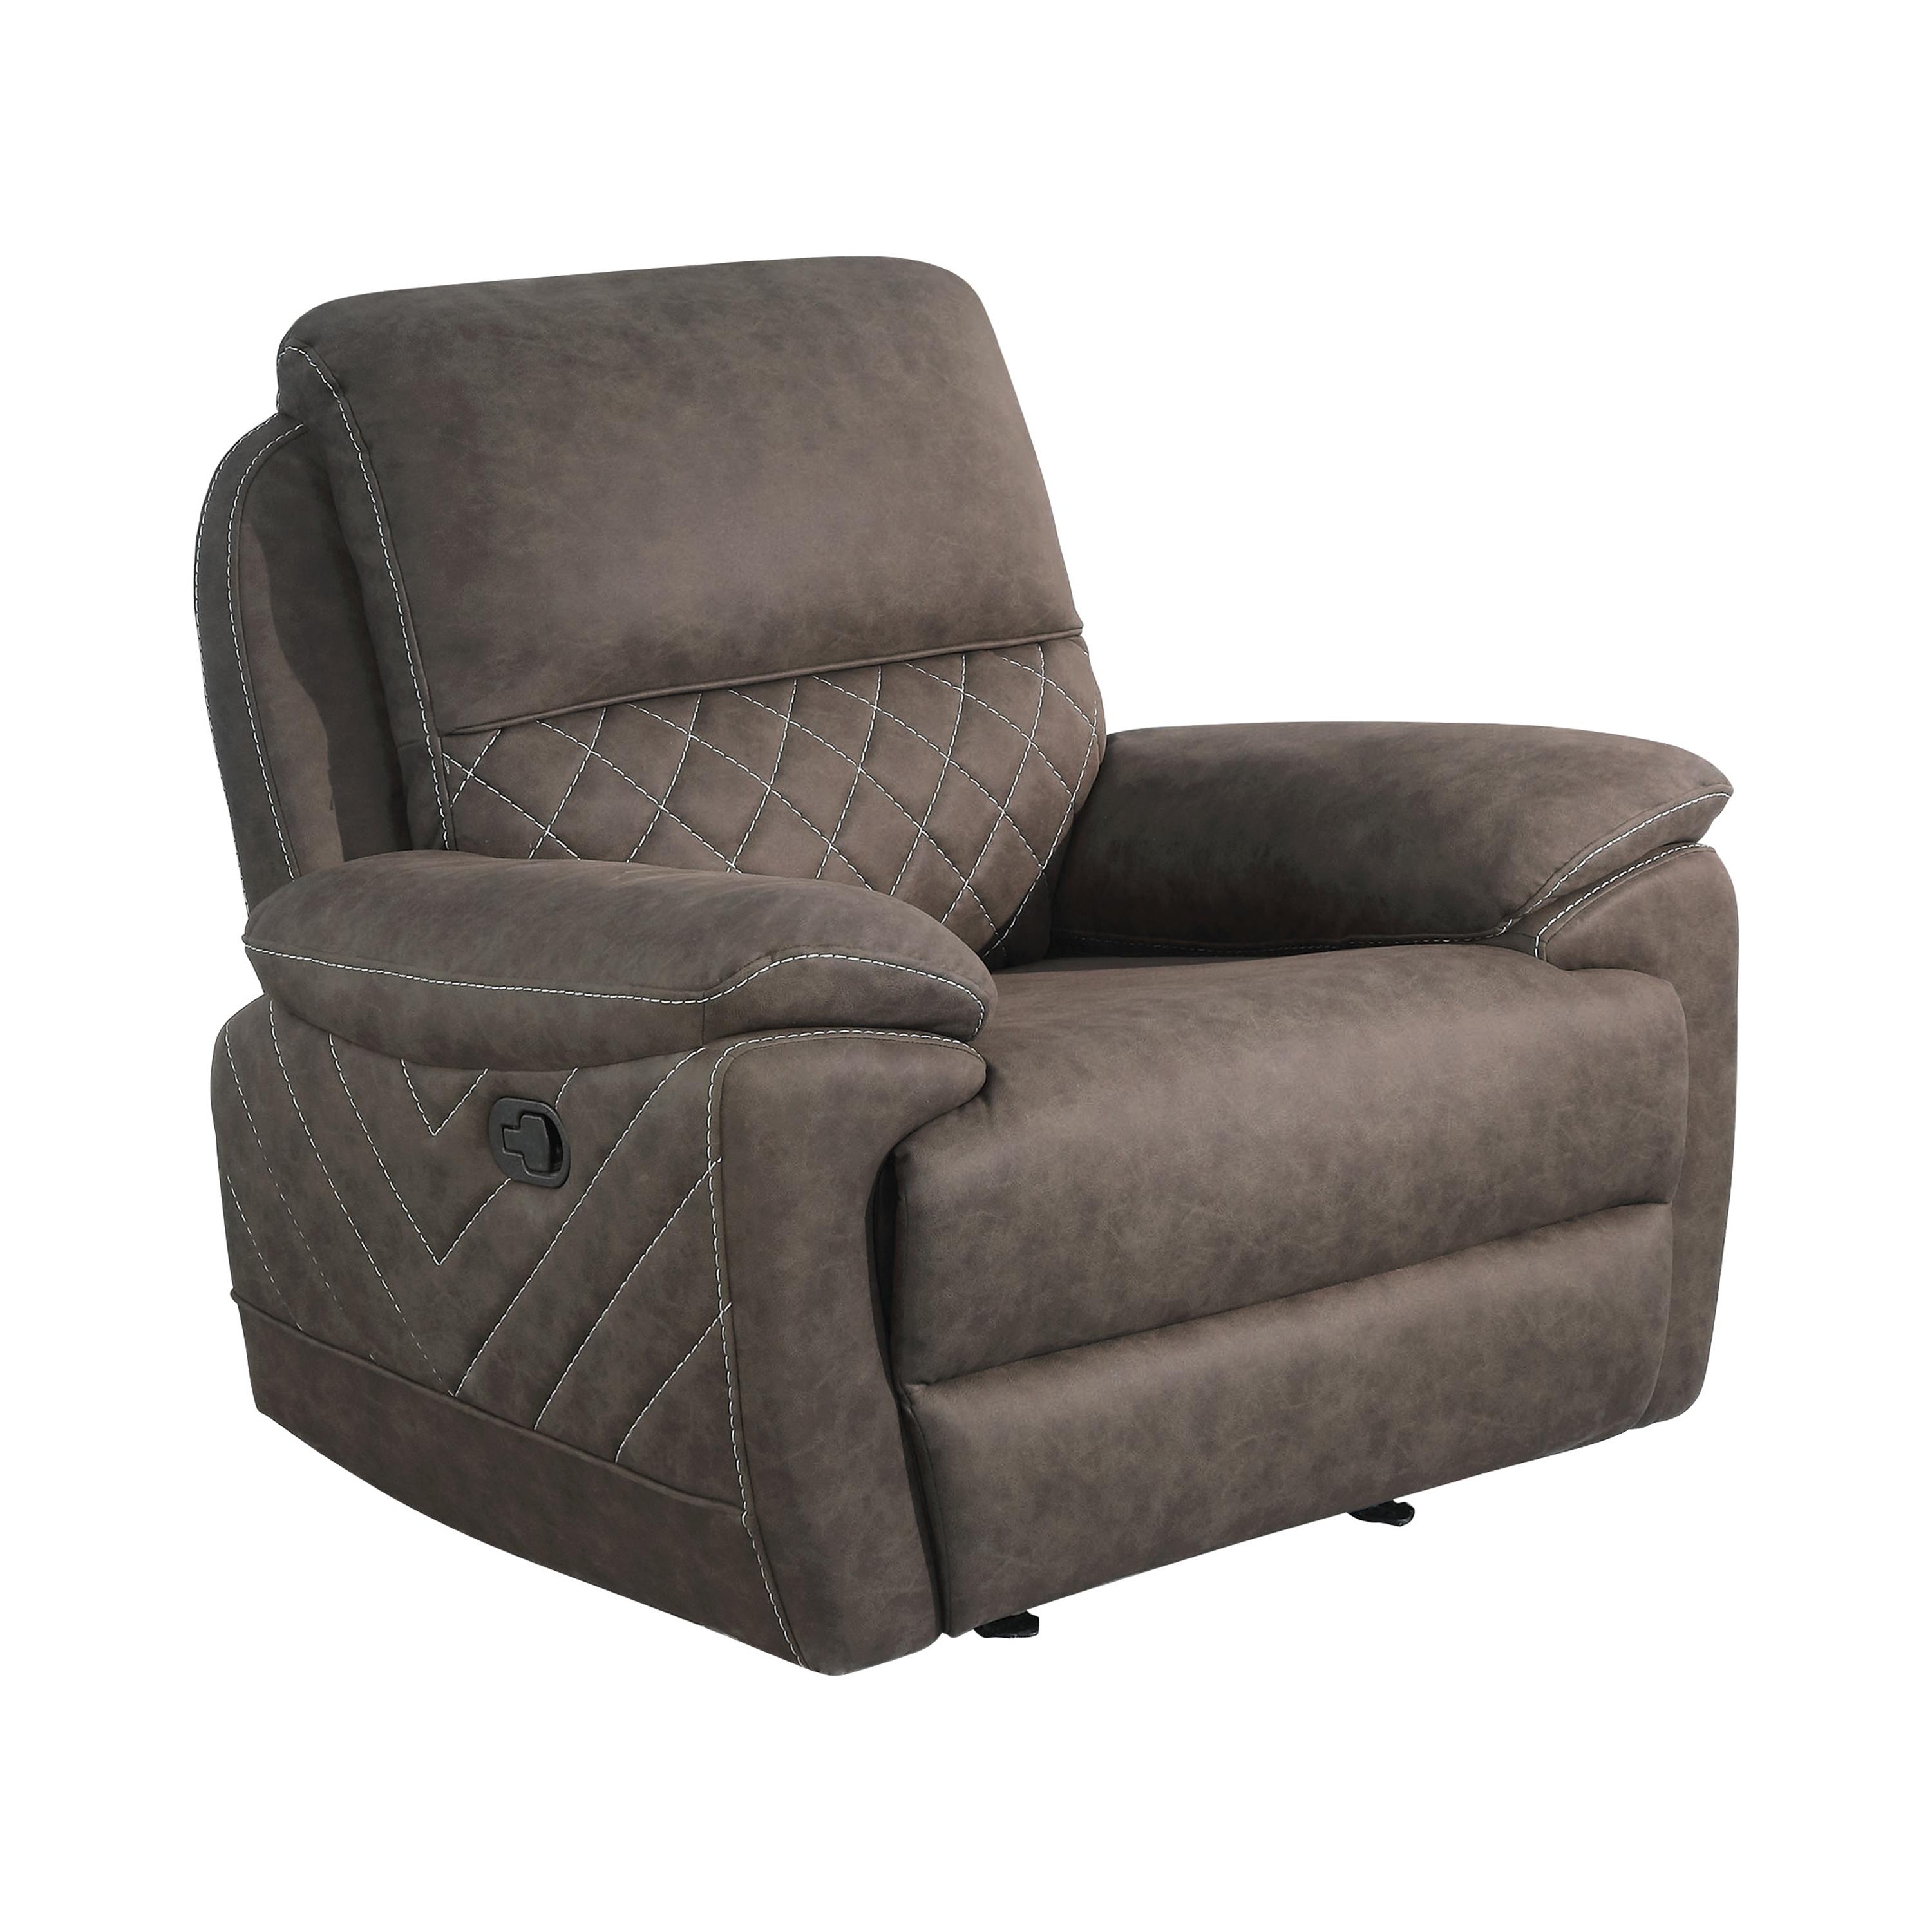 Transitional Glider recliner 608983 Variel 608983 in Taupe 